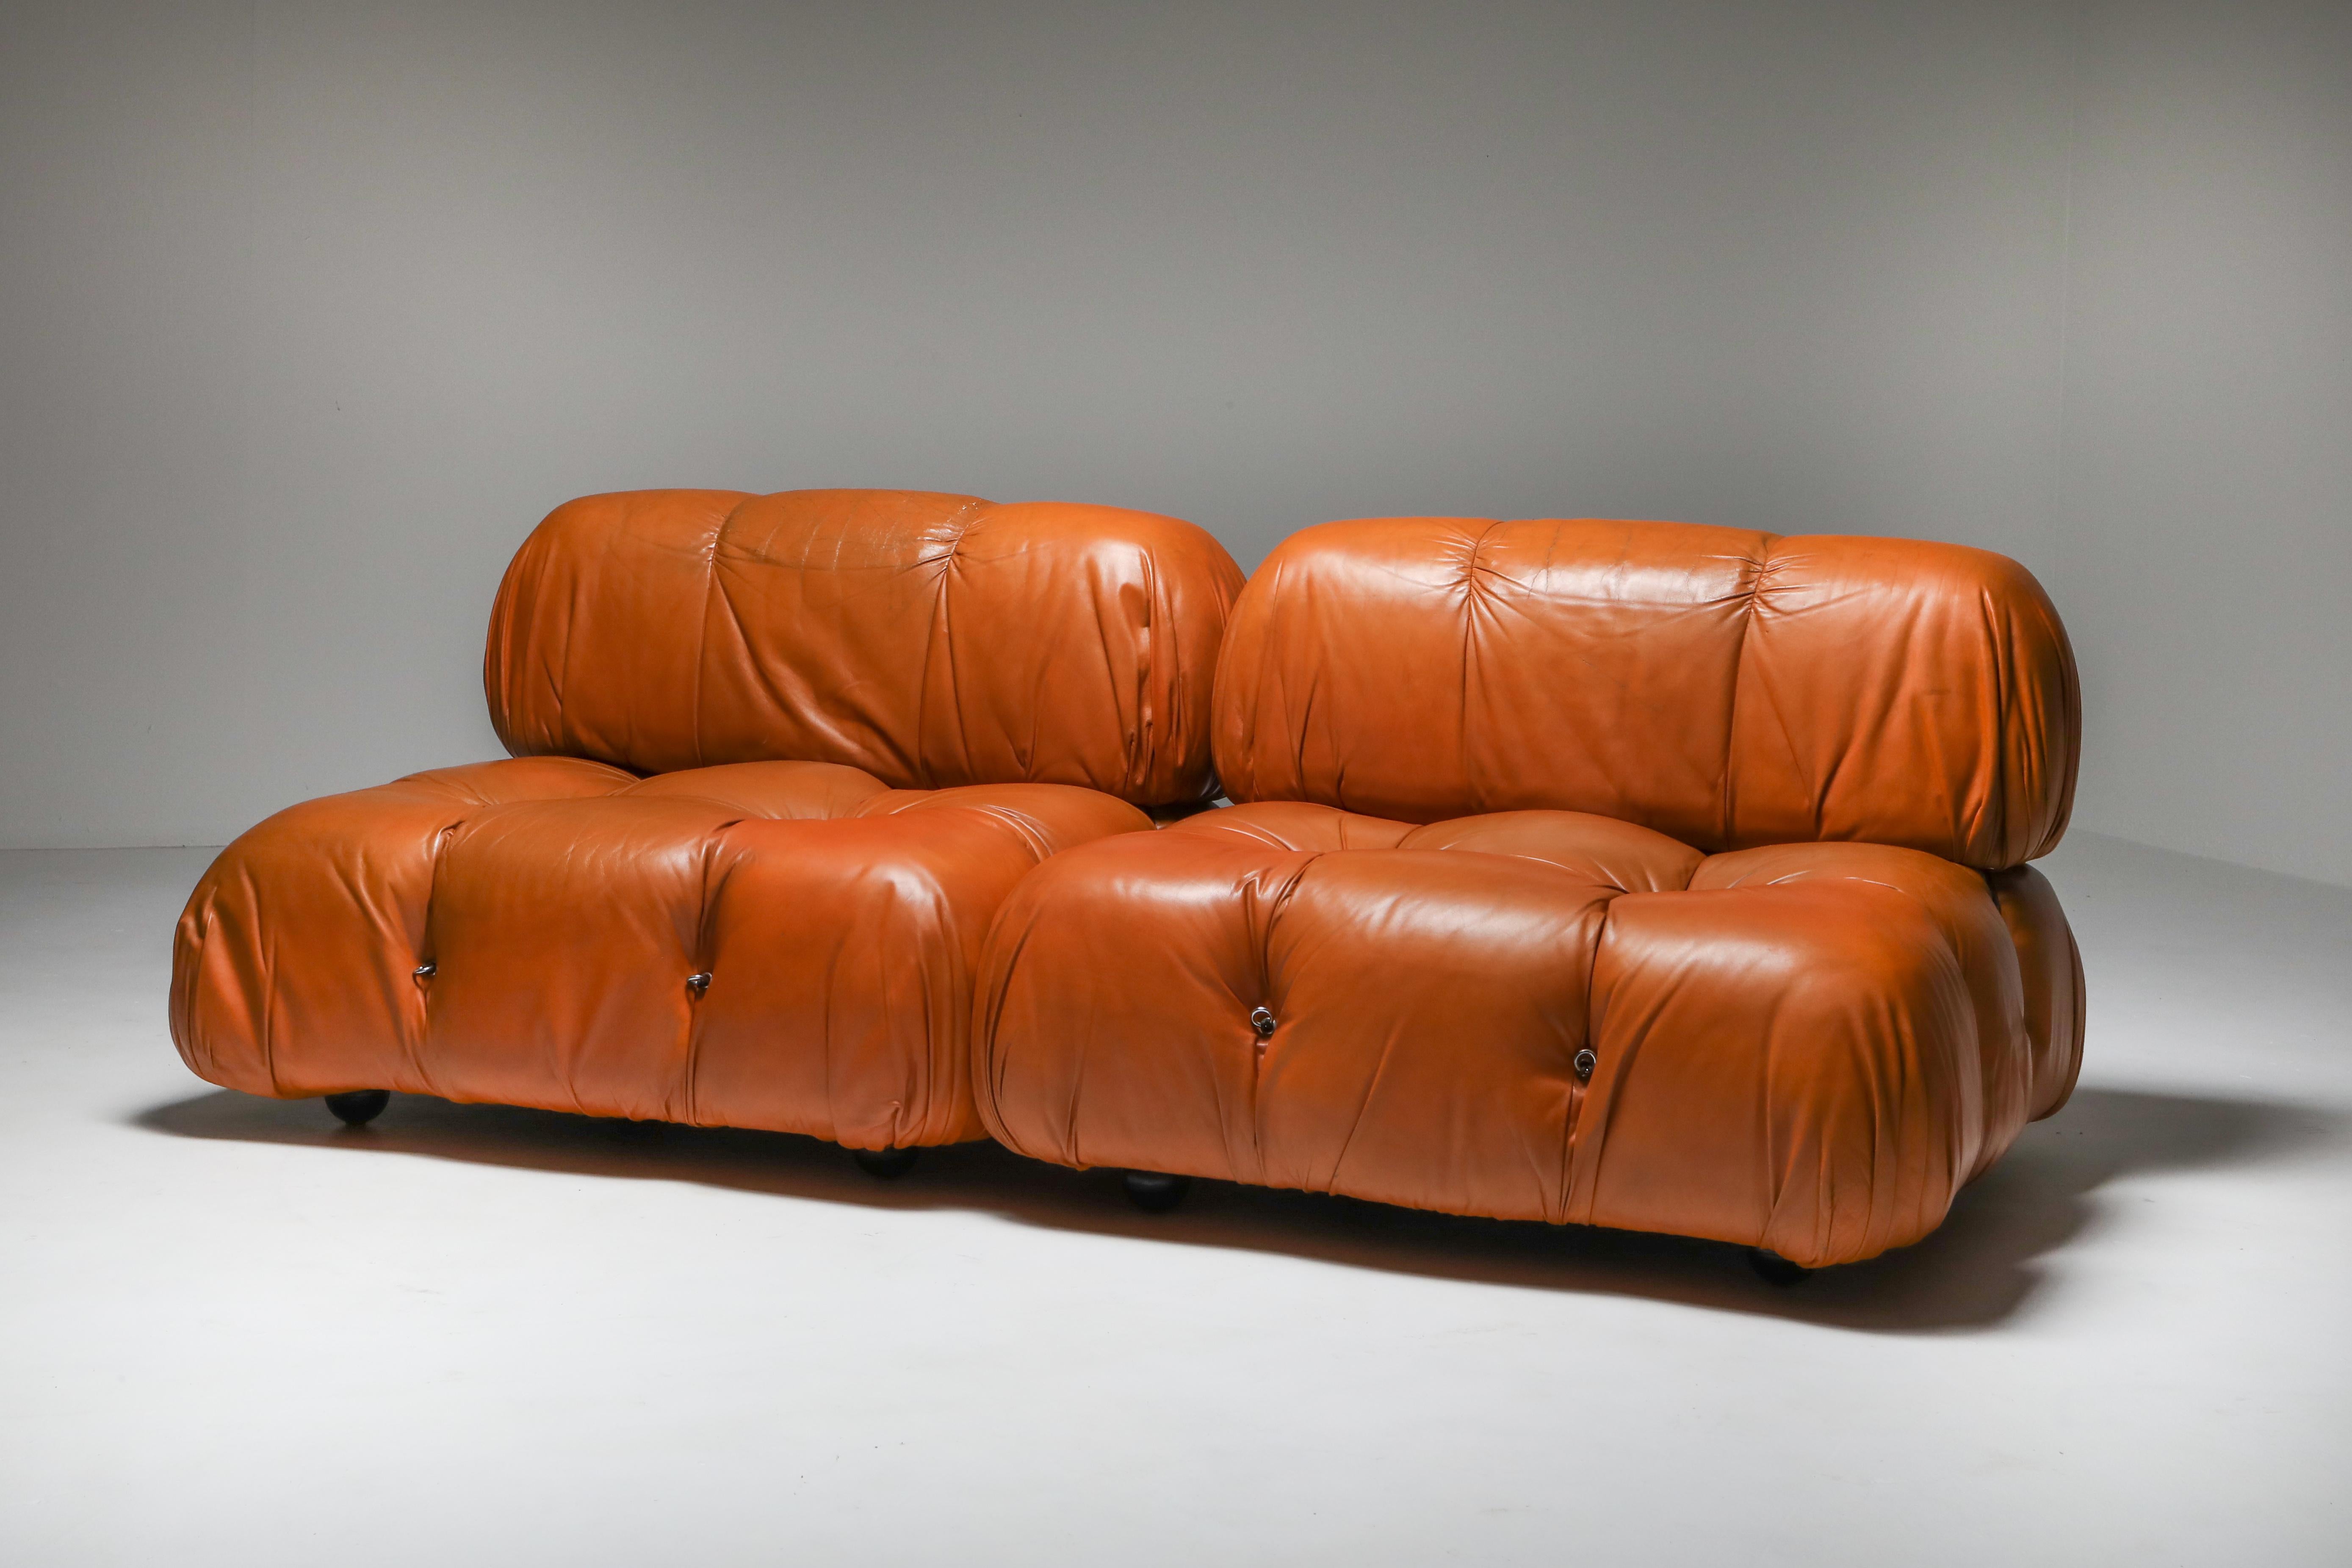 Mario Bellini, Camaleonda, B&B Italia, 1970s, sectional sofa.

Pair of original leather lounge chairs which together form a sofa of 2meters wide.
  